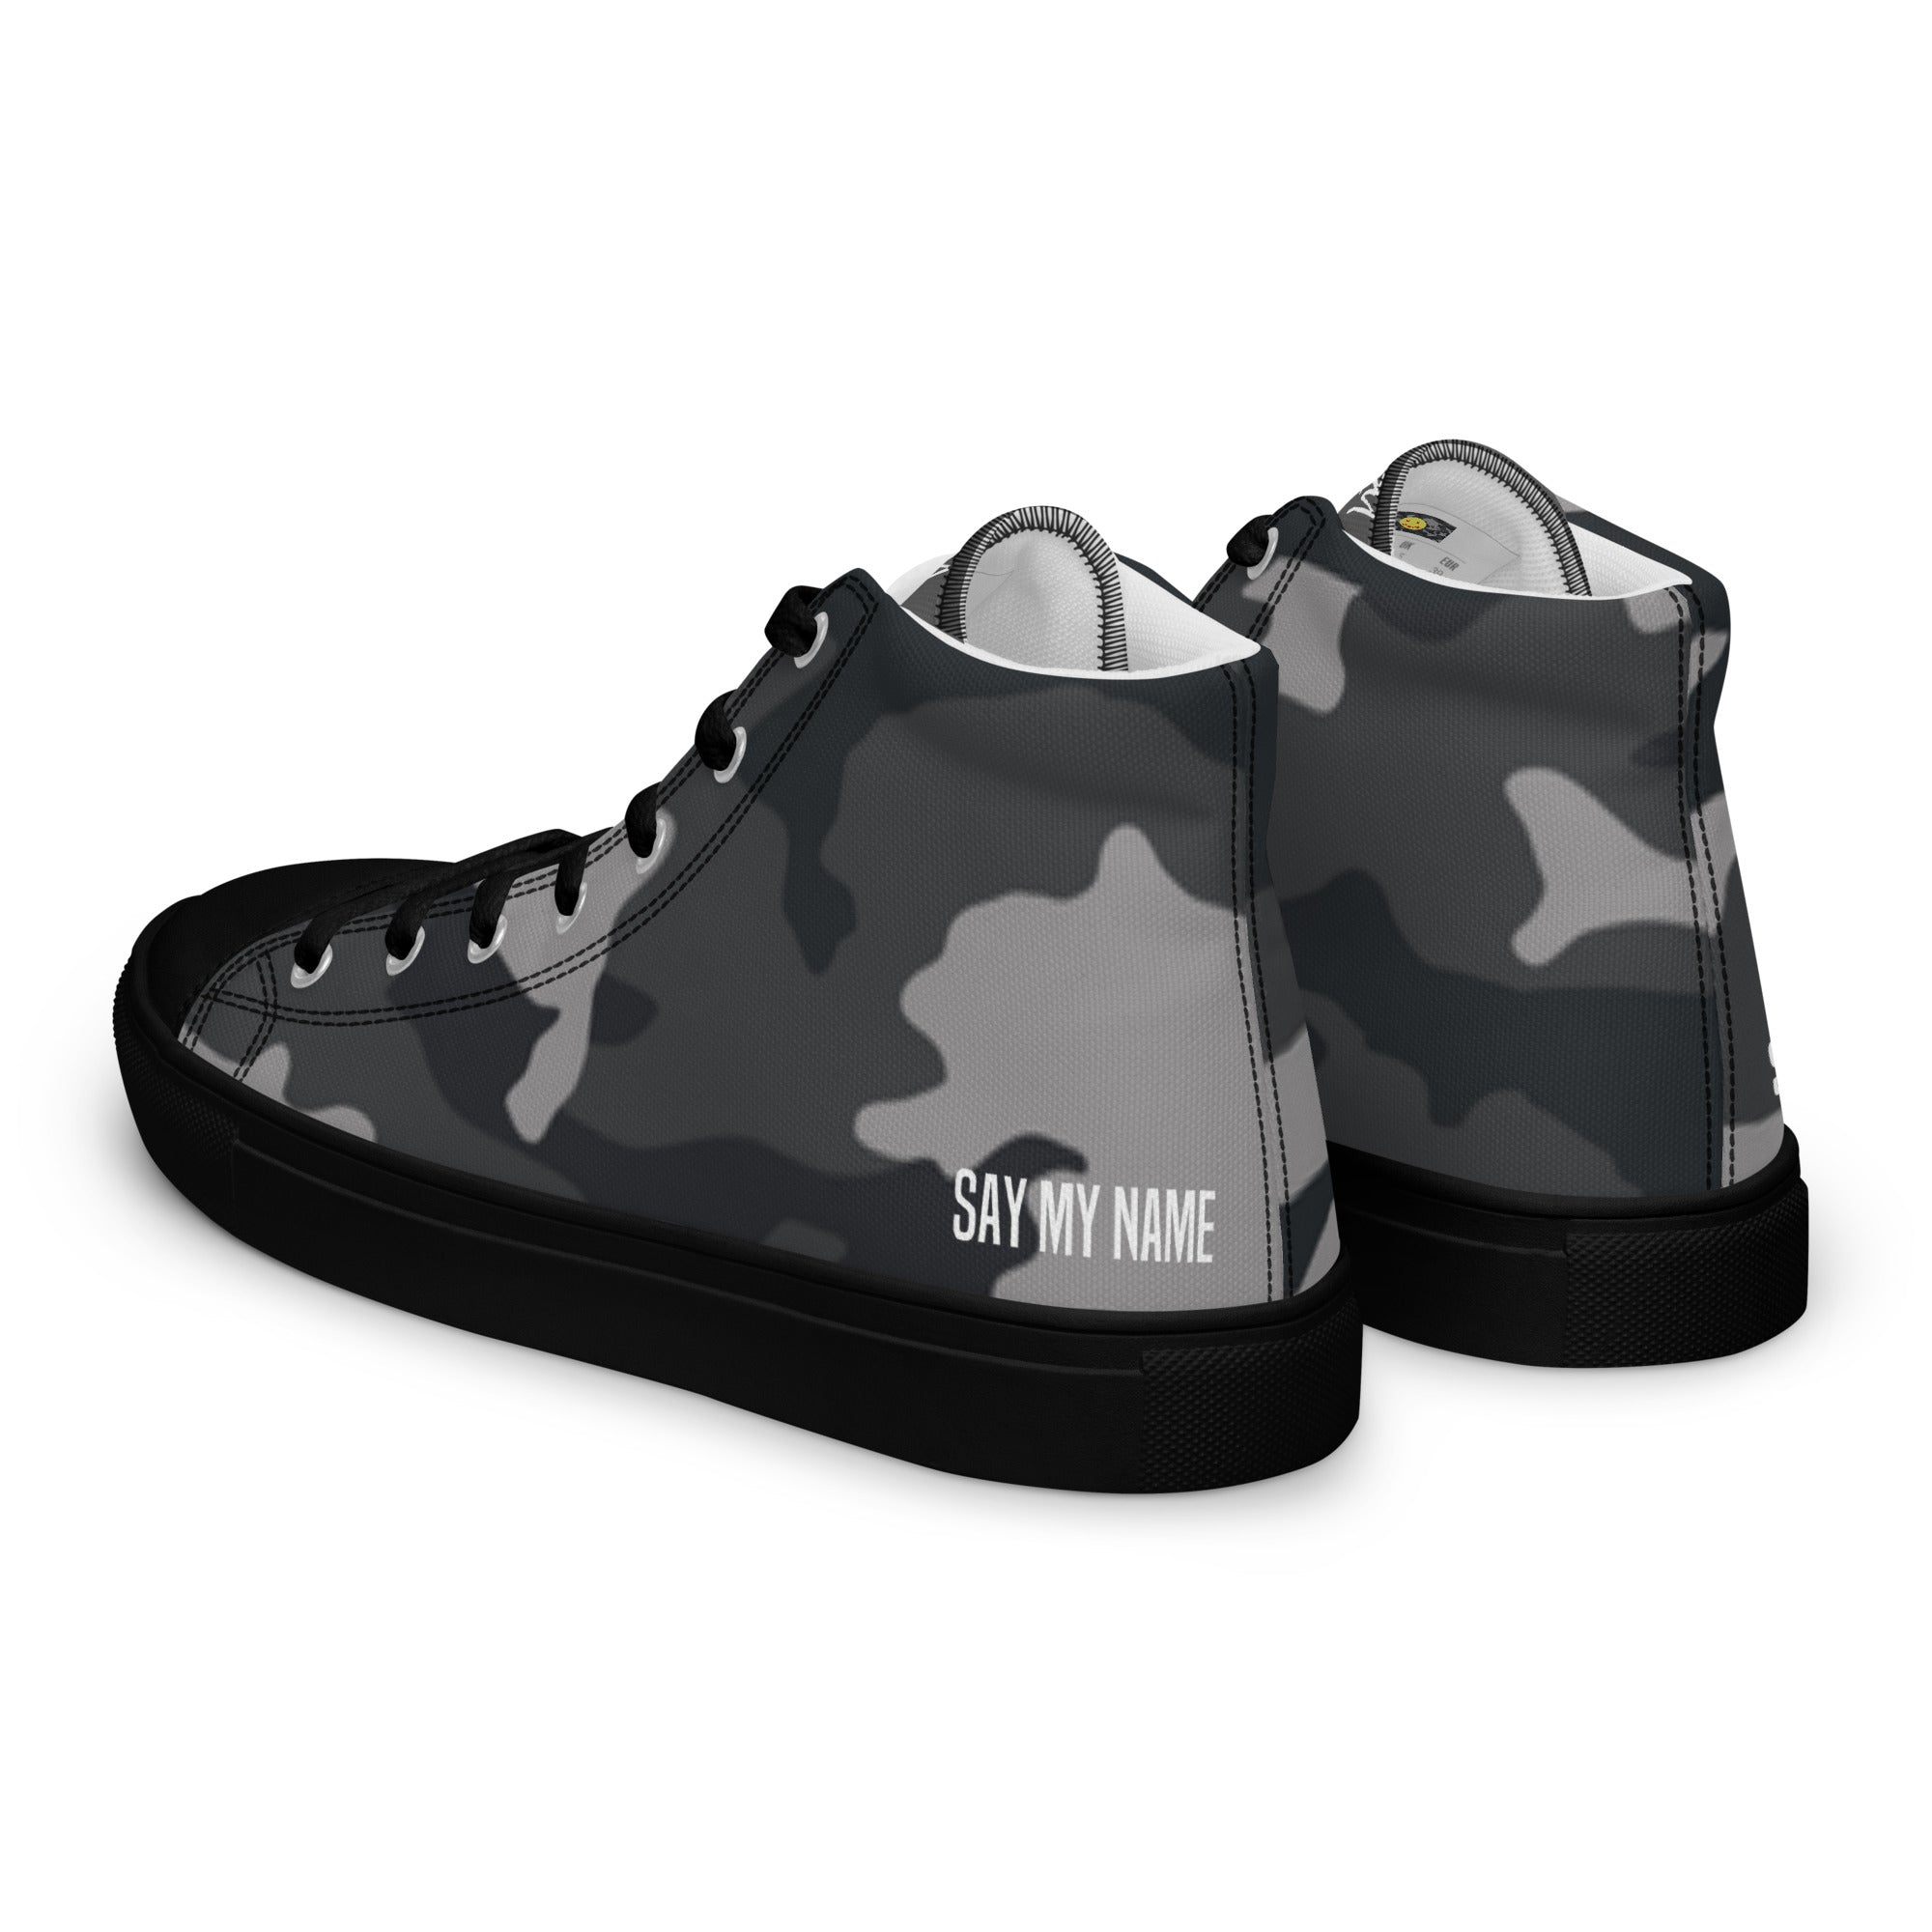 Women's gray camouflage high-top sneakers in "SAY MY NAME" canvas